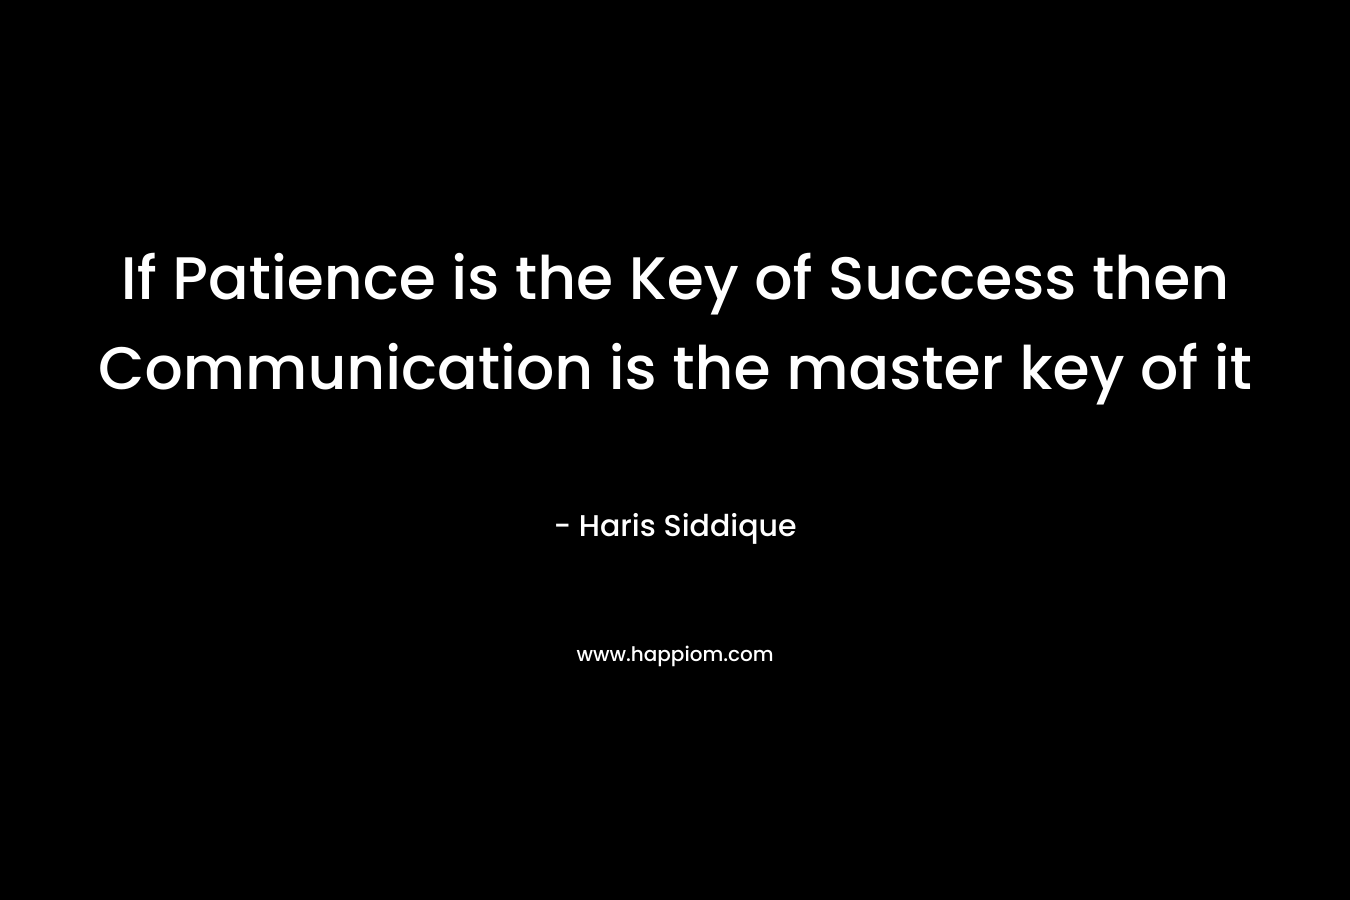 If Patience is the Key of Success then Communication is the master key of it